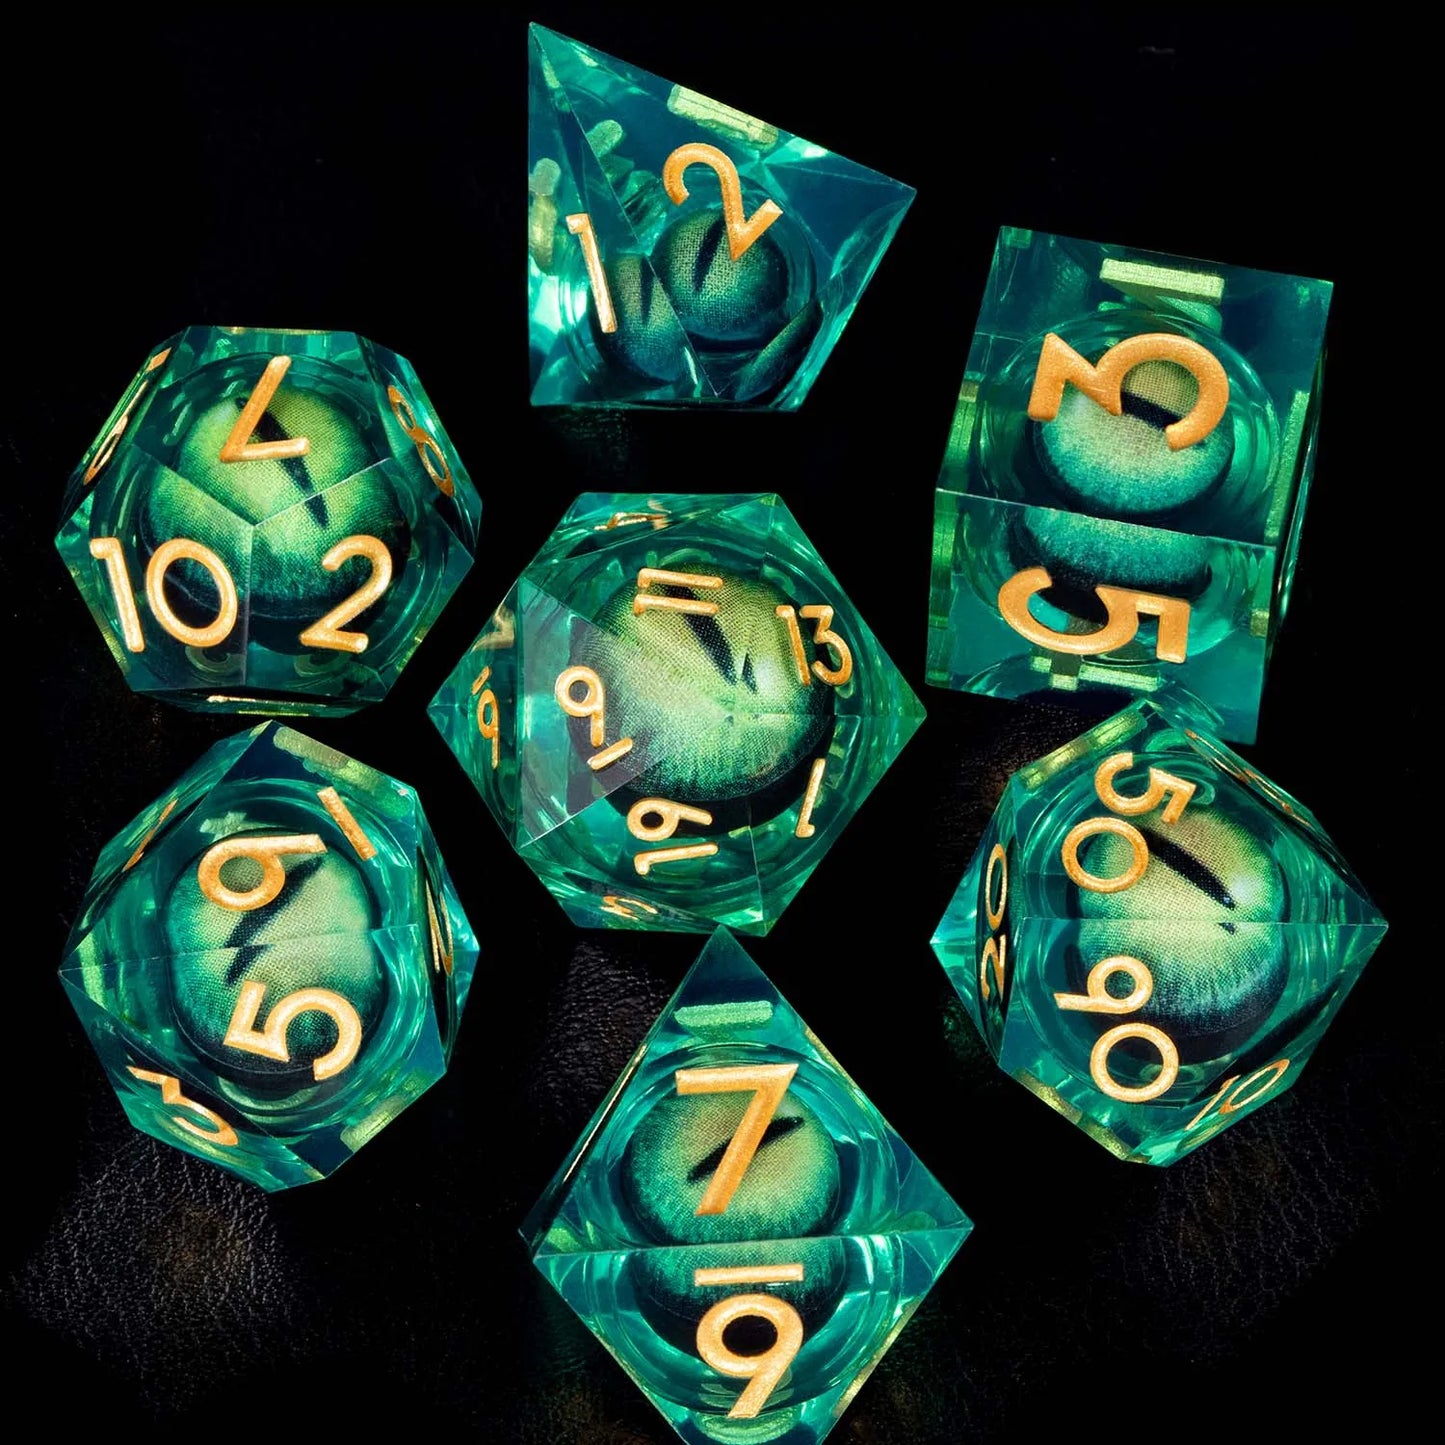 D and D Beholder's Liquid Flow Core Eye Resin Dice Set | Dnd Dungeon and Dragon Pathfinder Role Playing Game Dice | D20 D&D Dice YY-01